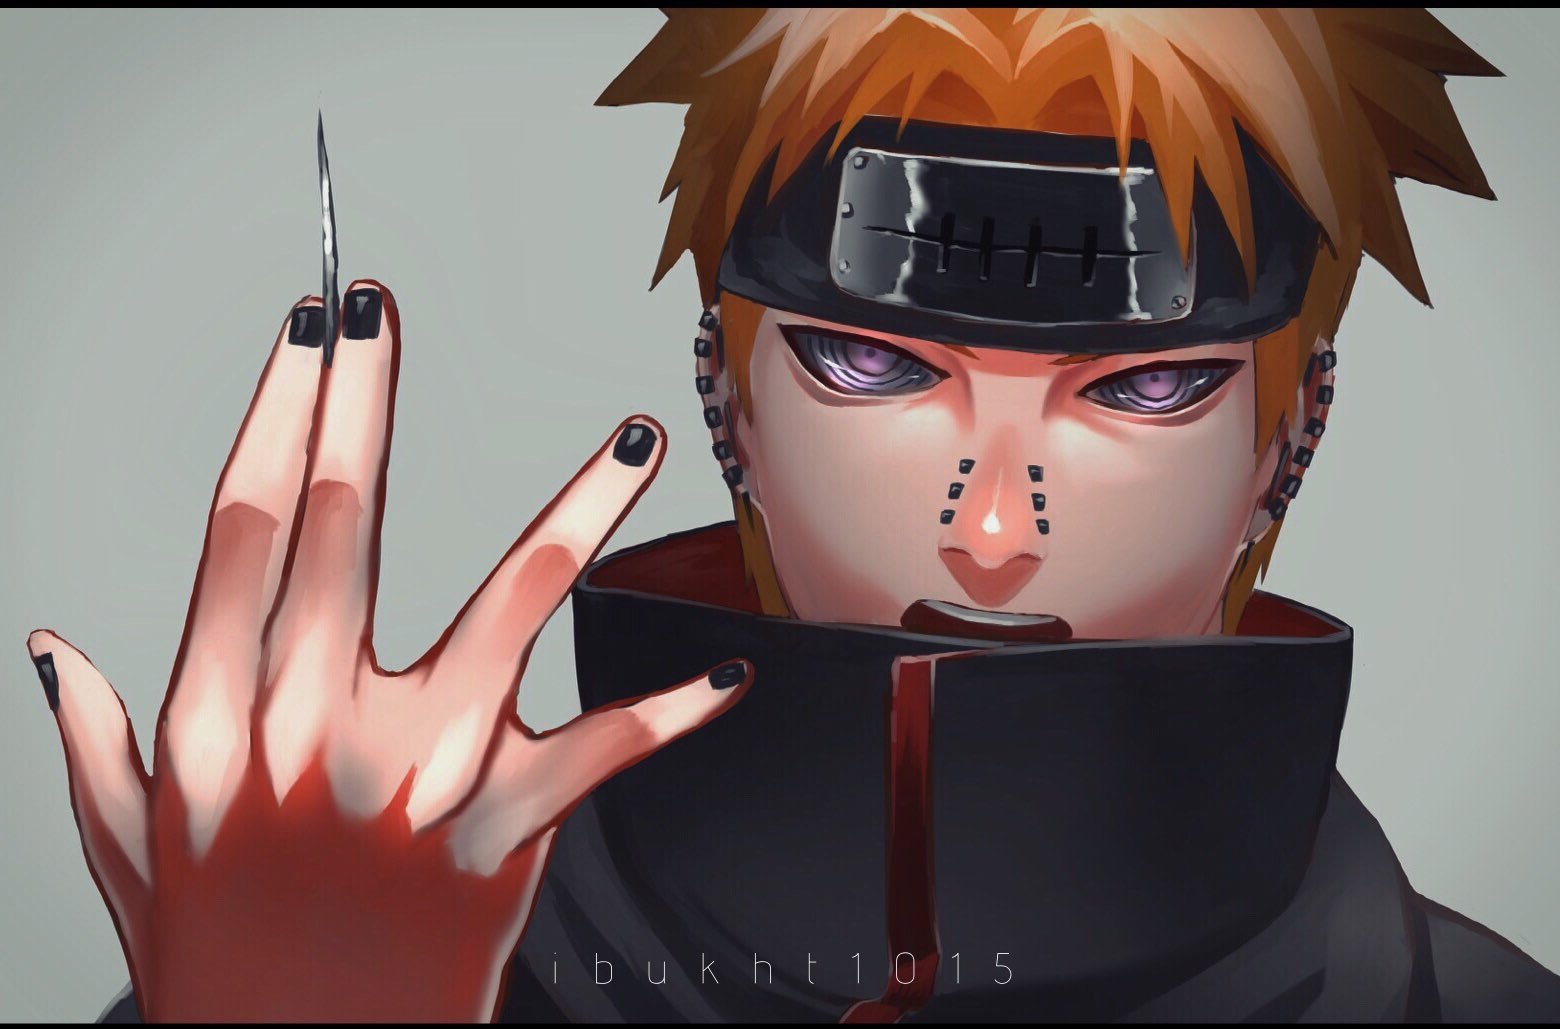 Anime Naruto Picture by a href="https://alphacoders.com/author/view/35...